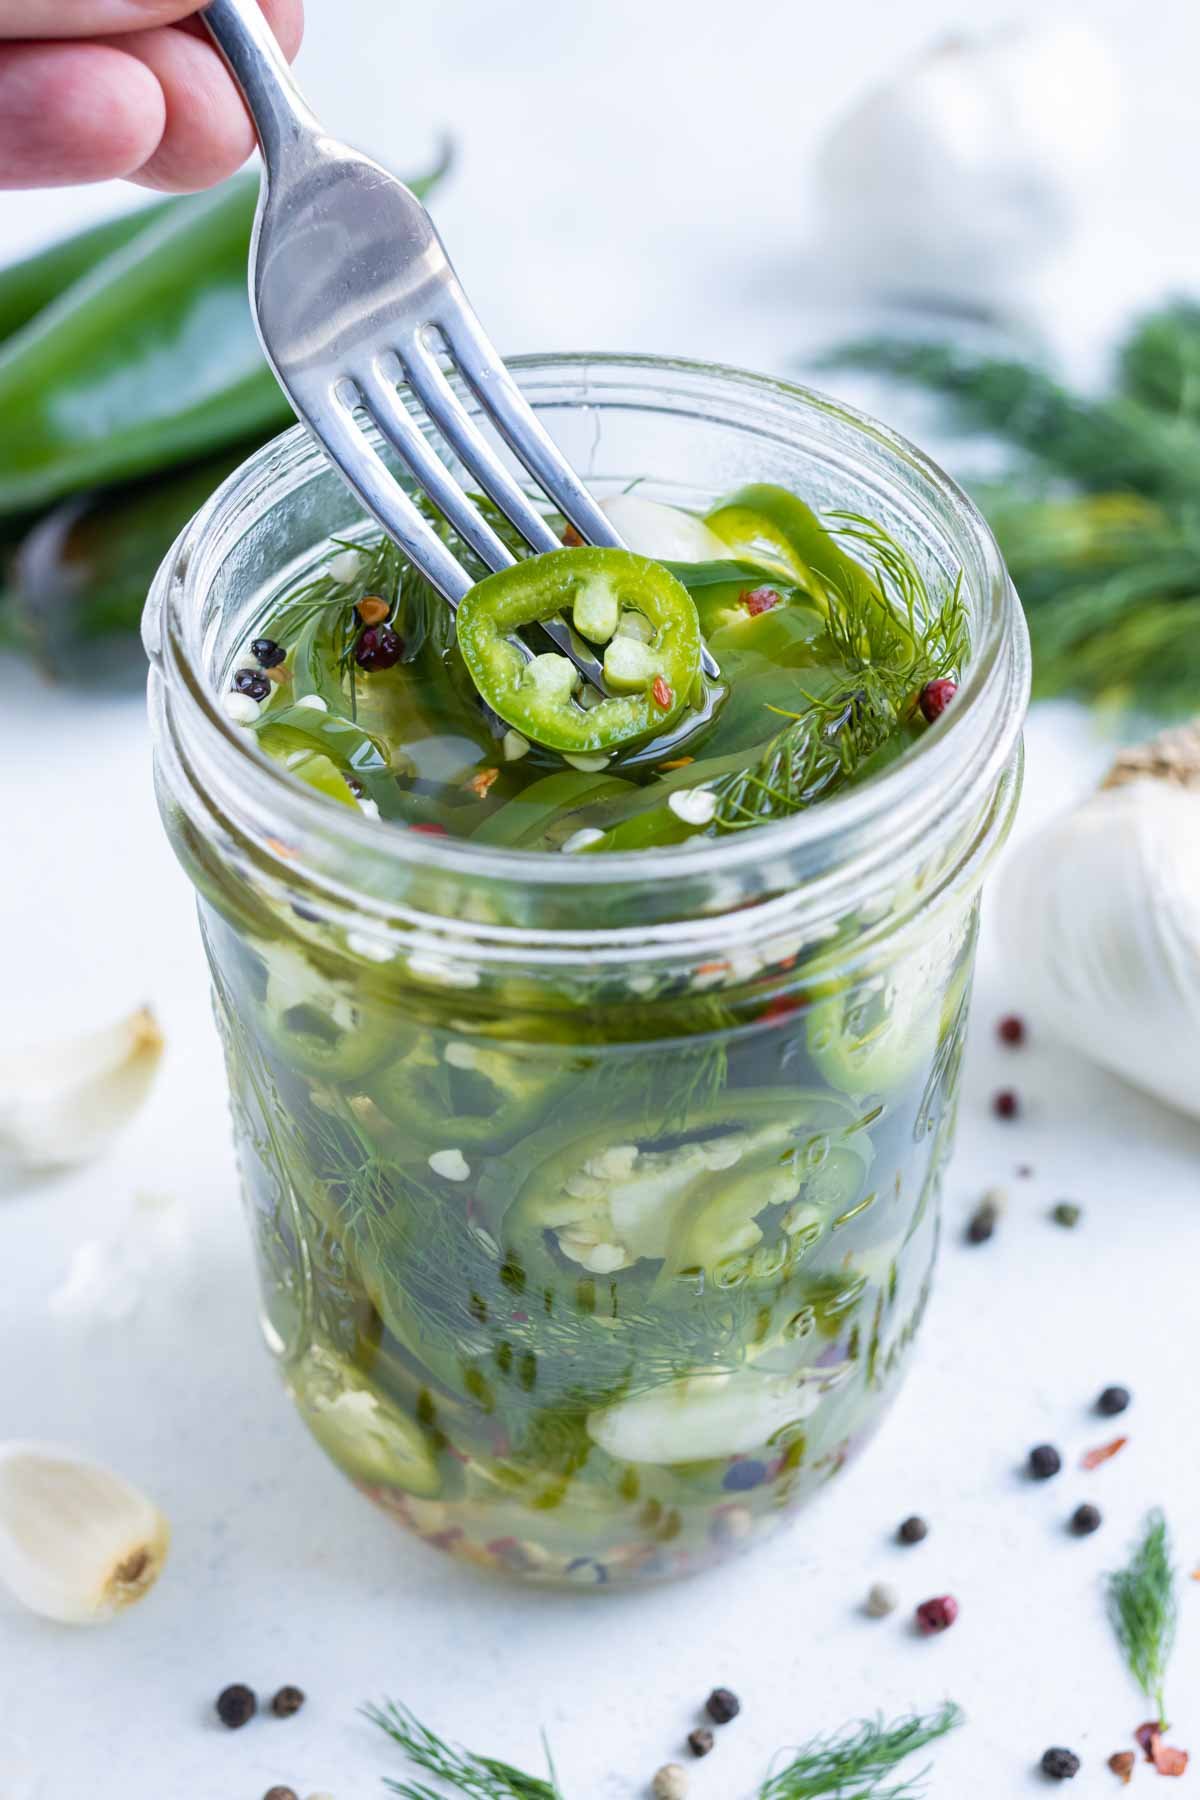 Crisp and flavorful jalapeños in a glass jar.